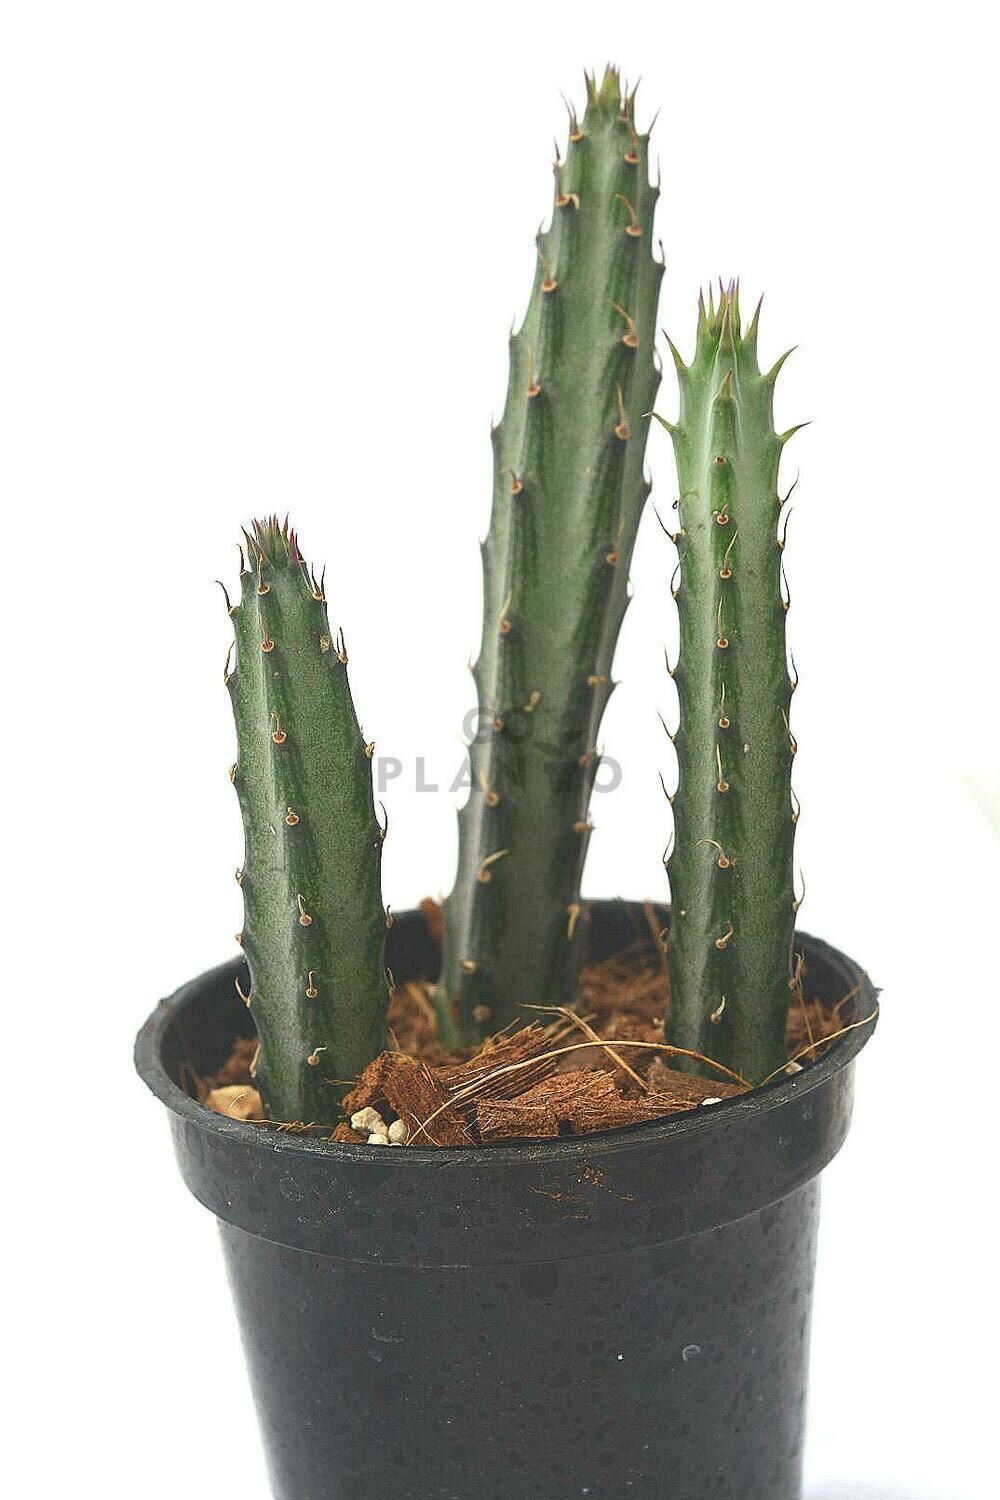 Triangle Cactus in 3 inches Nursery Pot